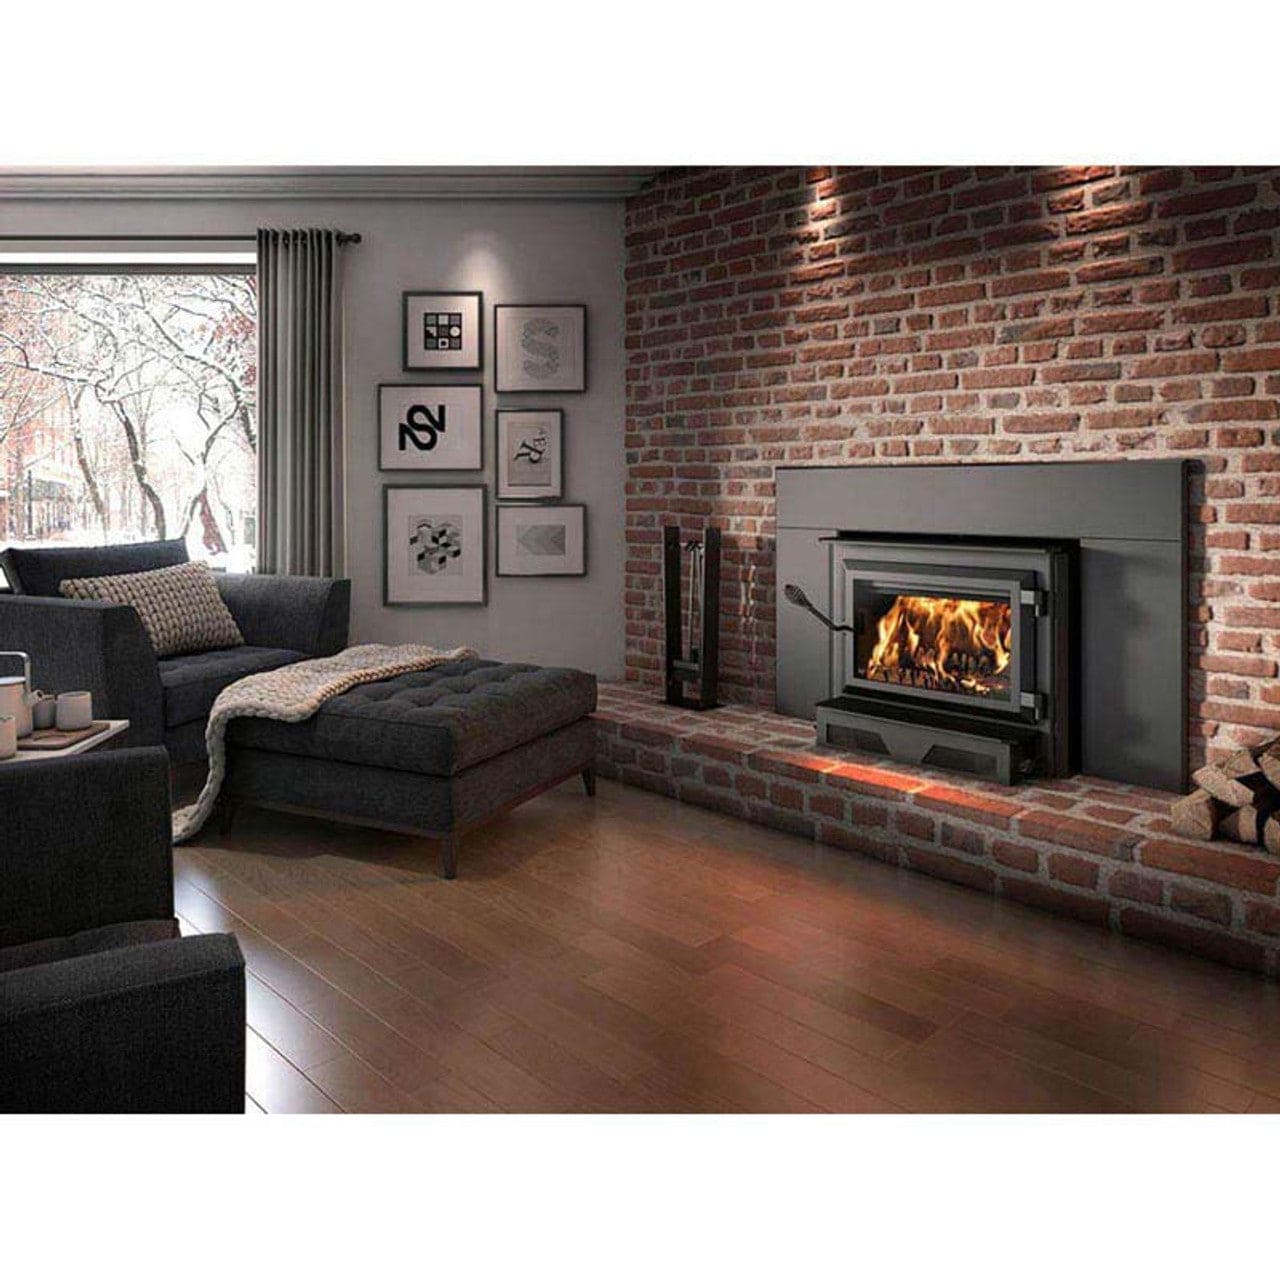 Ventis HEI240 Wood Burning Fireplace Insert and Blower with 2100 Sq Ft Max Heating Space - HEI240 - Chimney Cricket